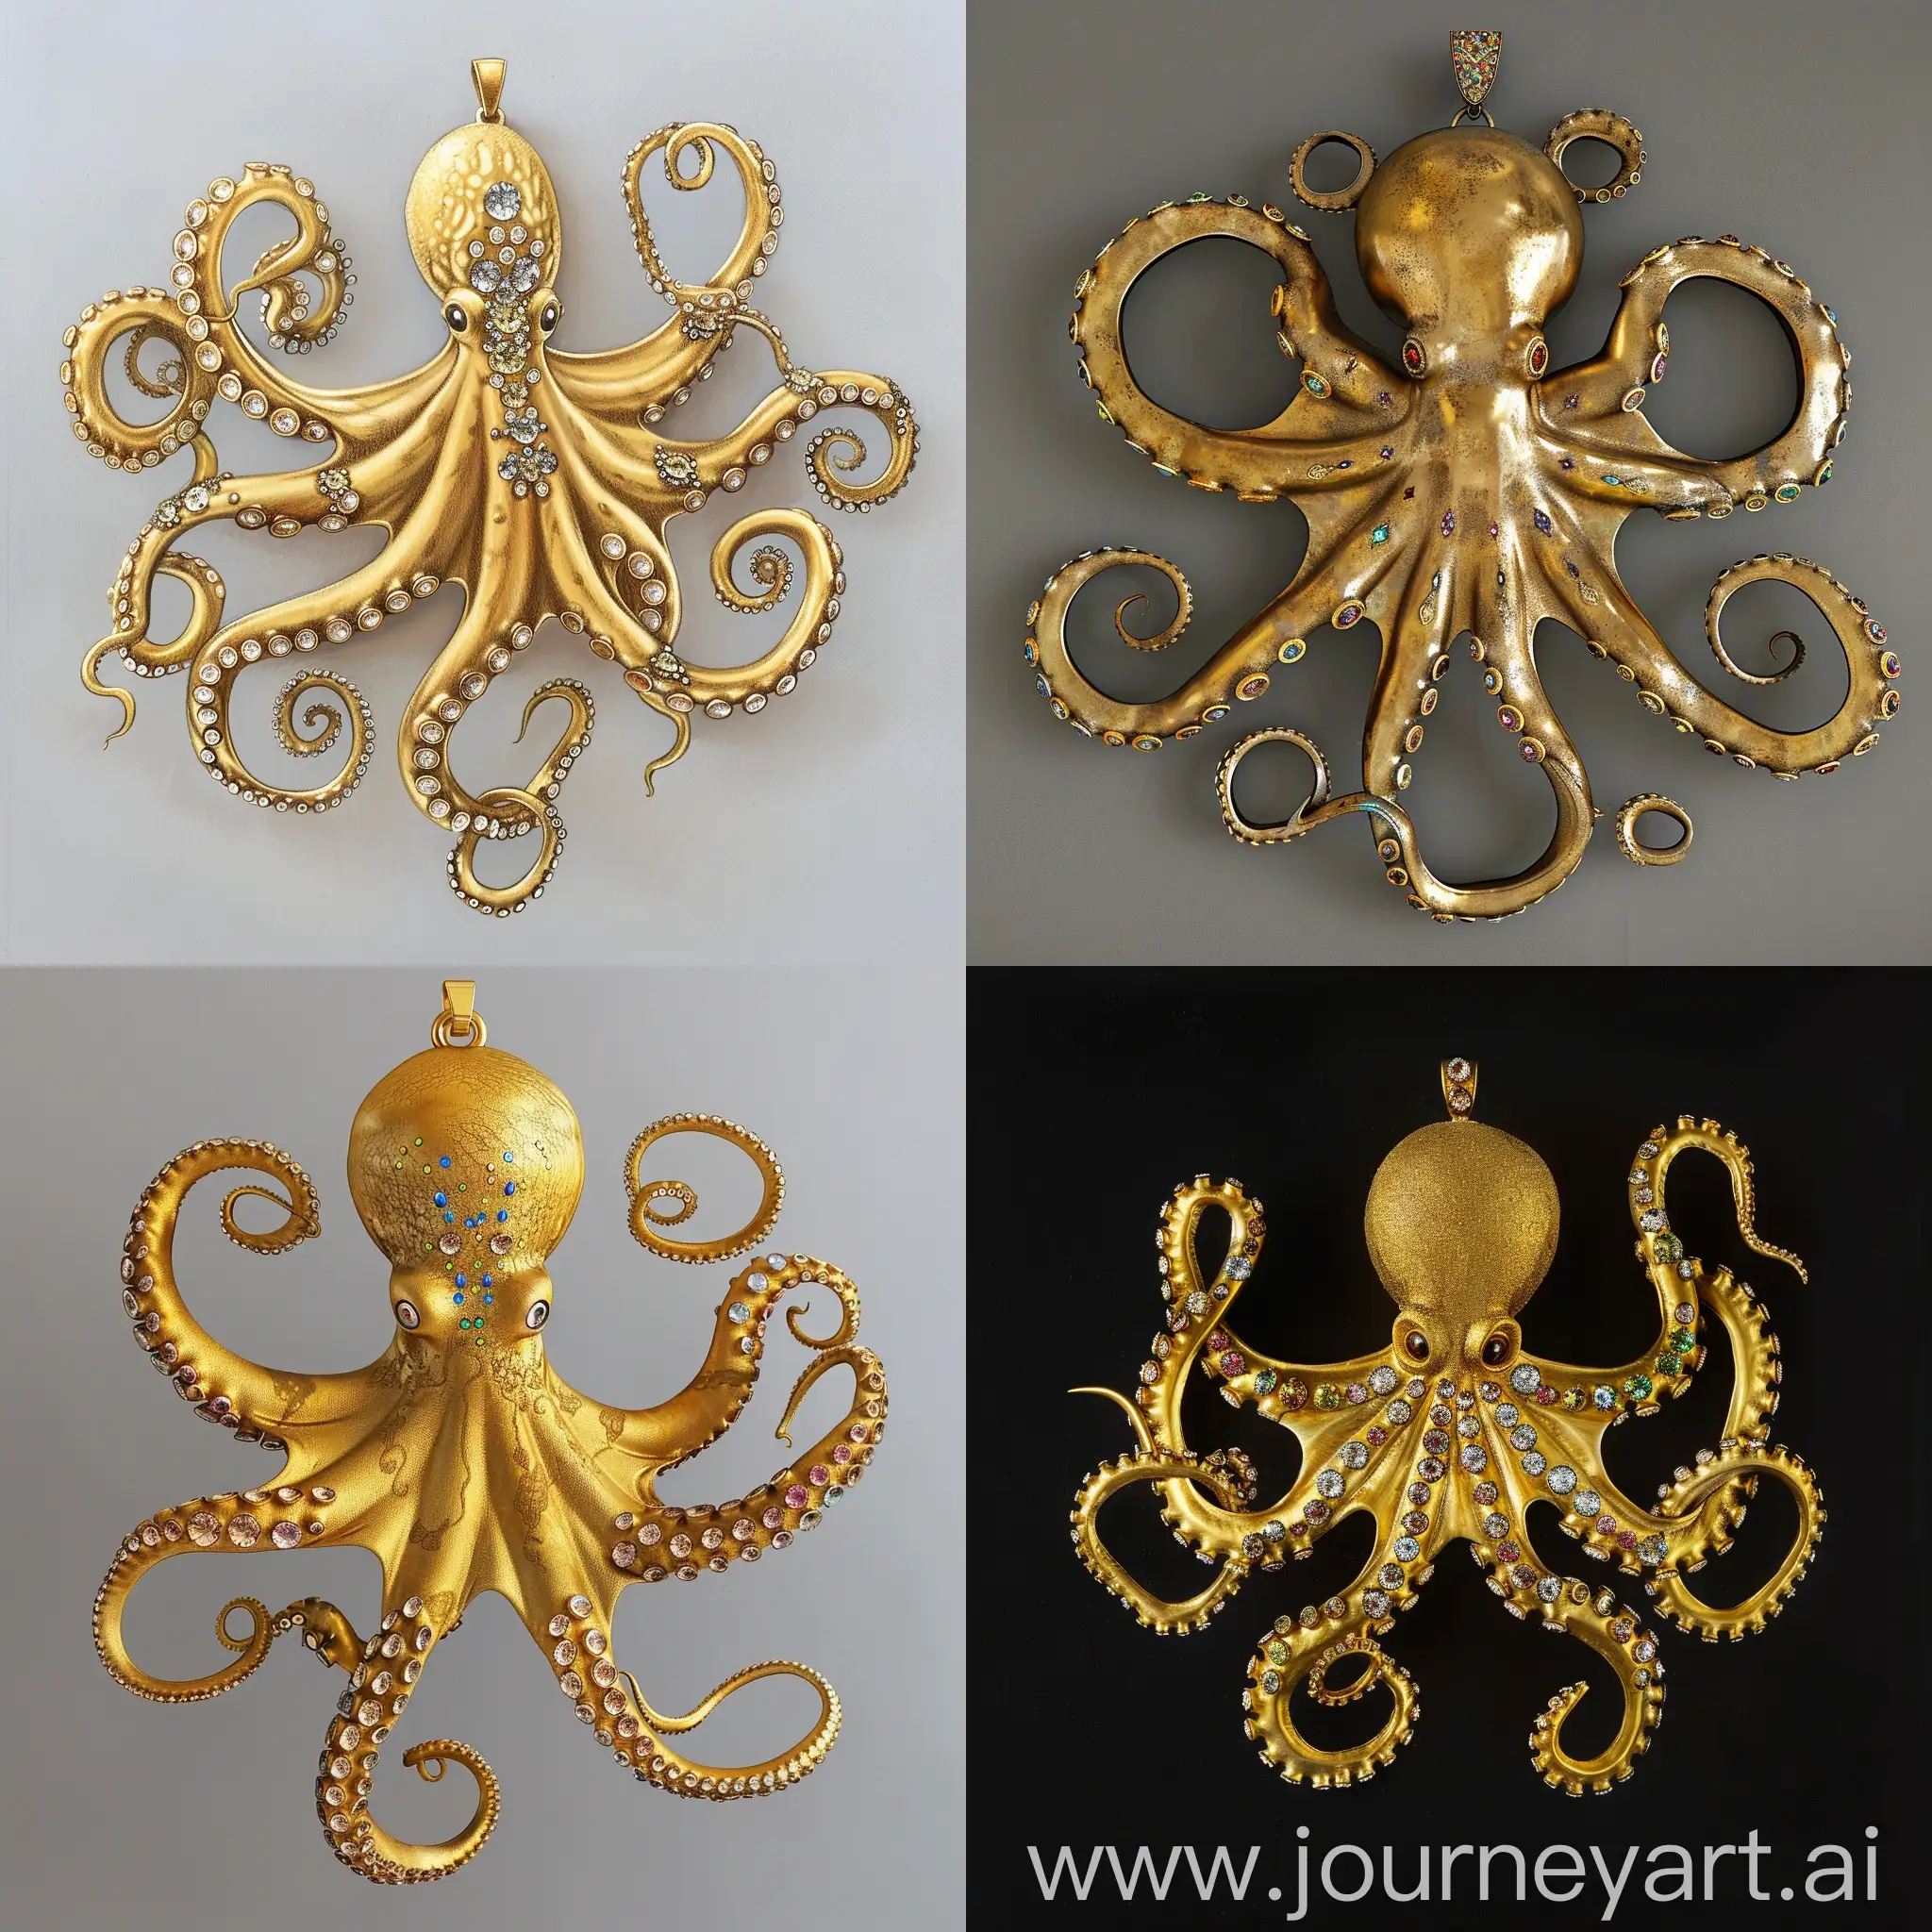 Imagine you are a matrix gold software and draw a gold pendant octopus with jeweled arms 